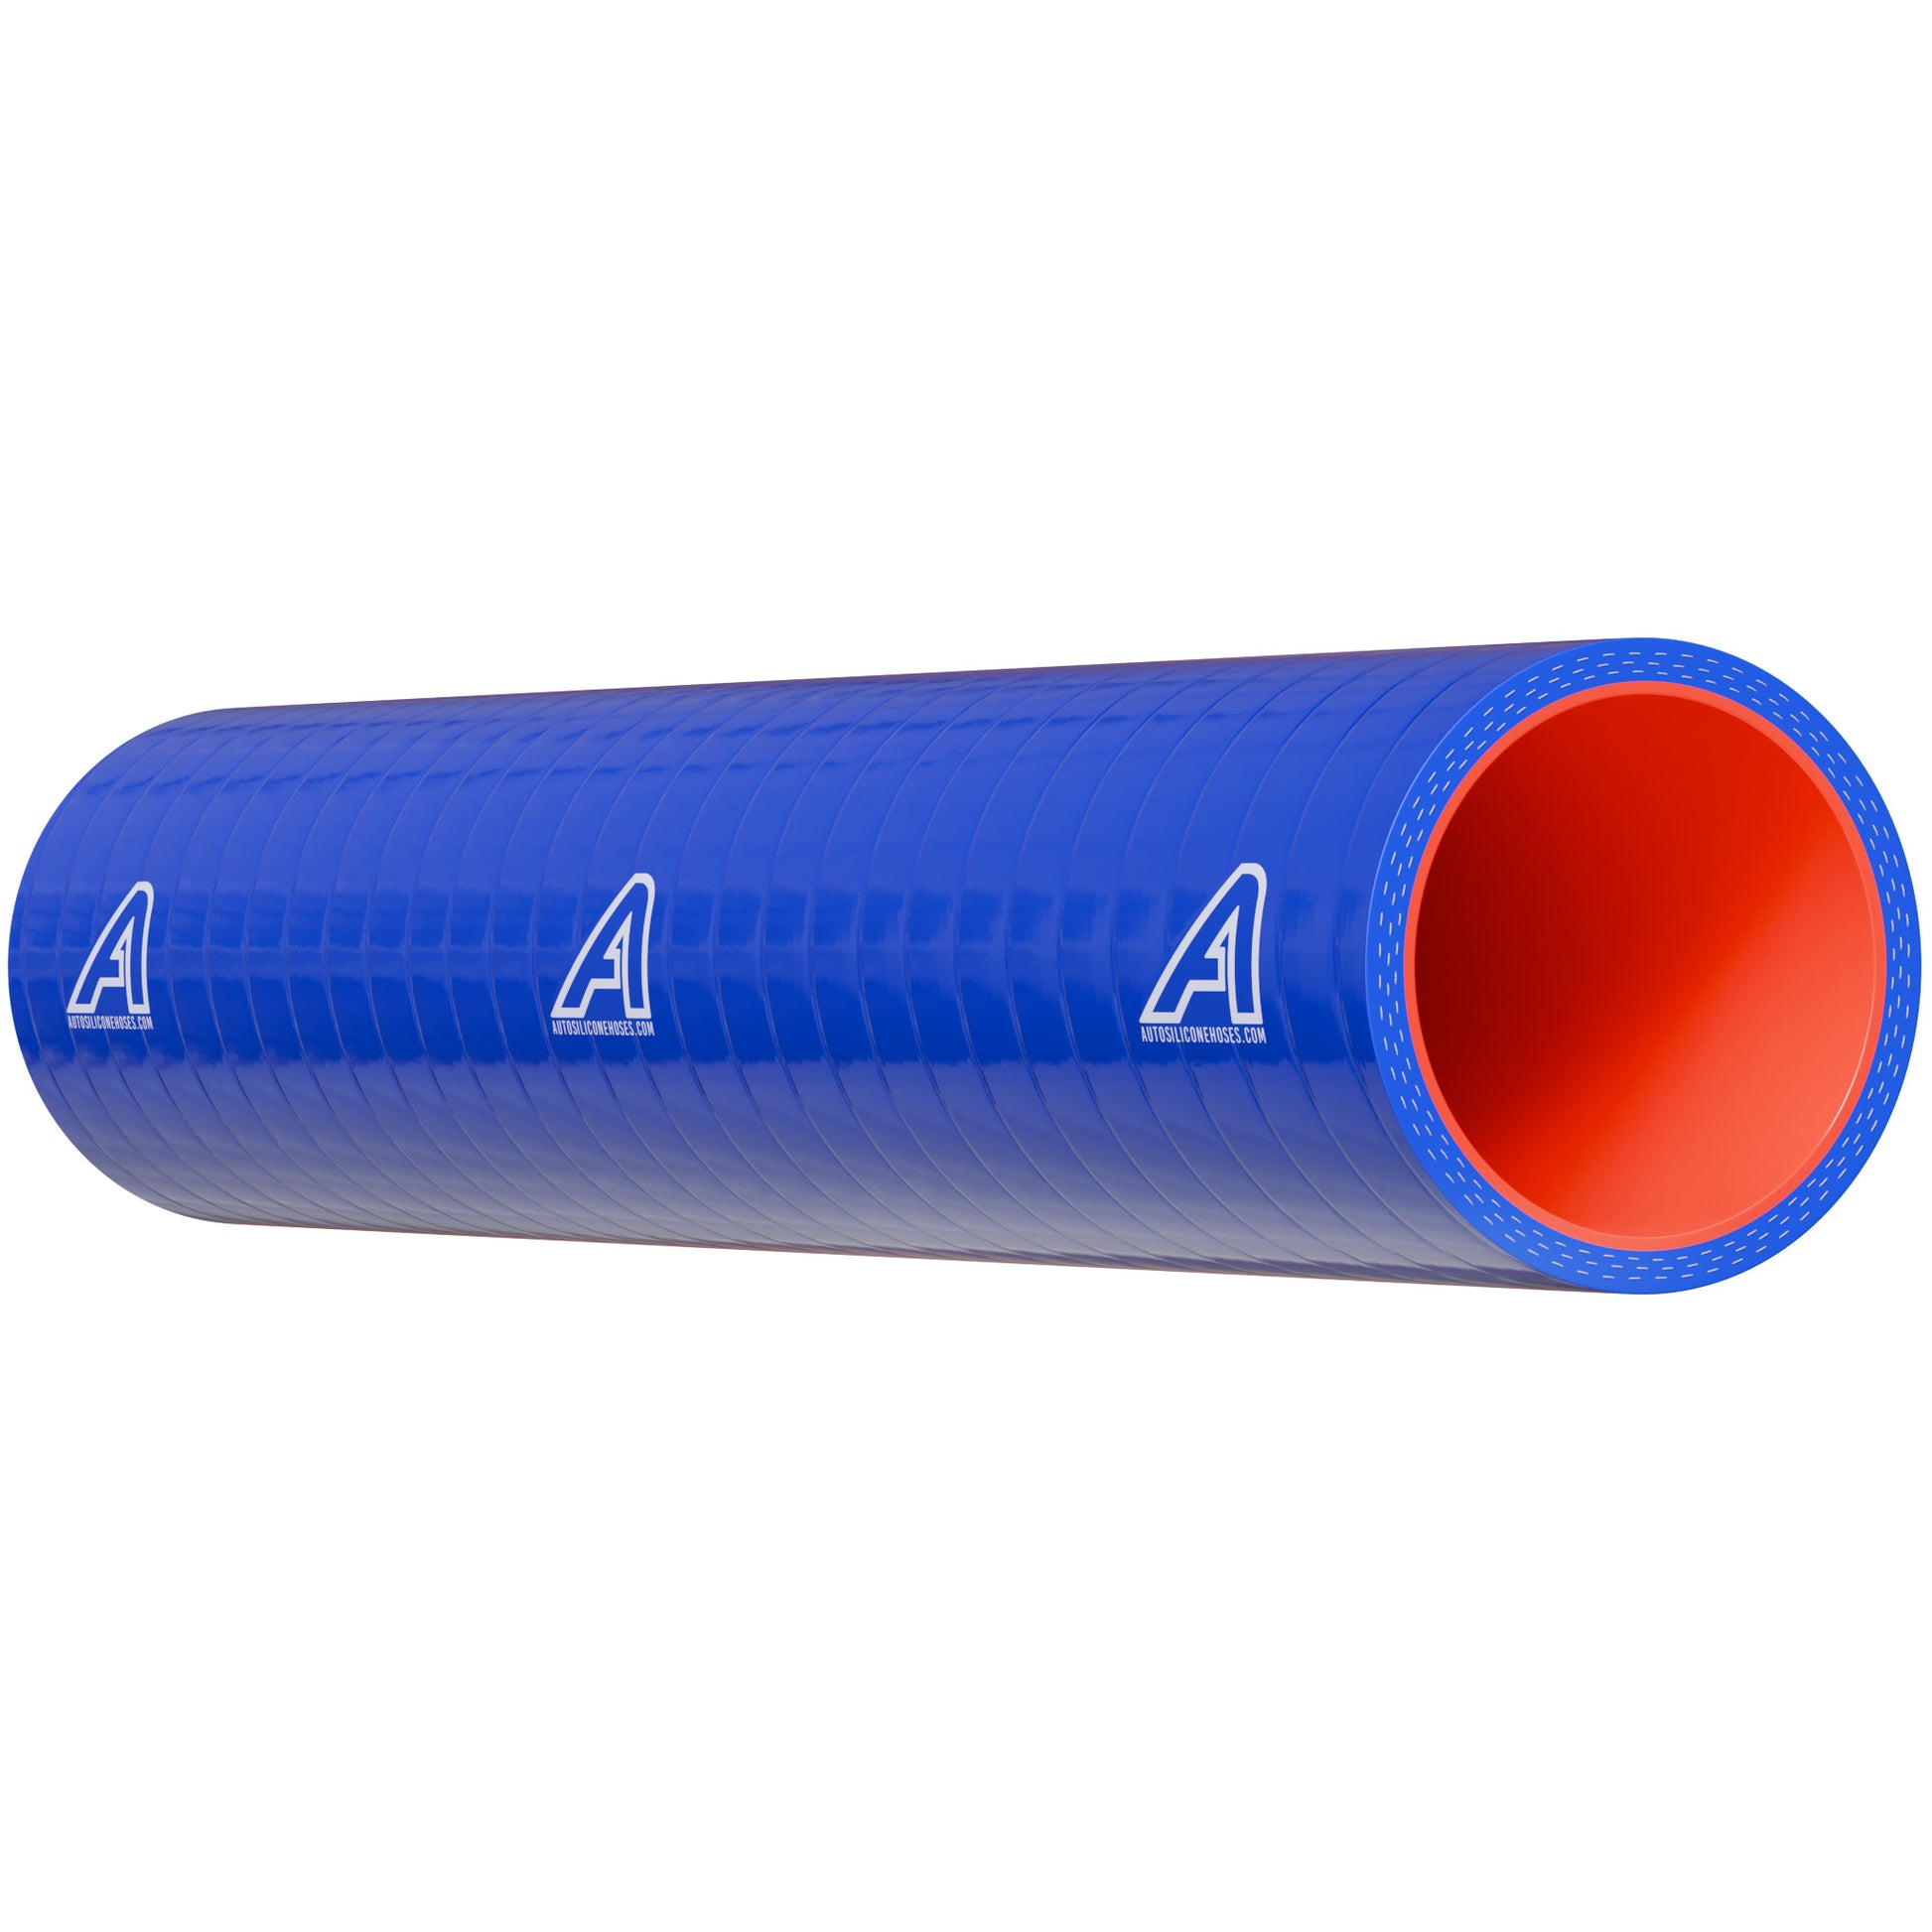 51mm ID Silicone Flouro Fuel & Oil Hose Joiner Motor Vehicle Engine Parts Auto Silicone Hoses   